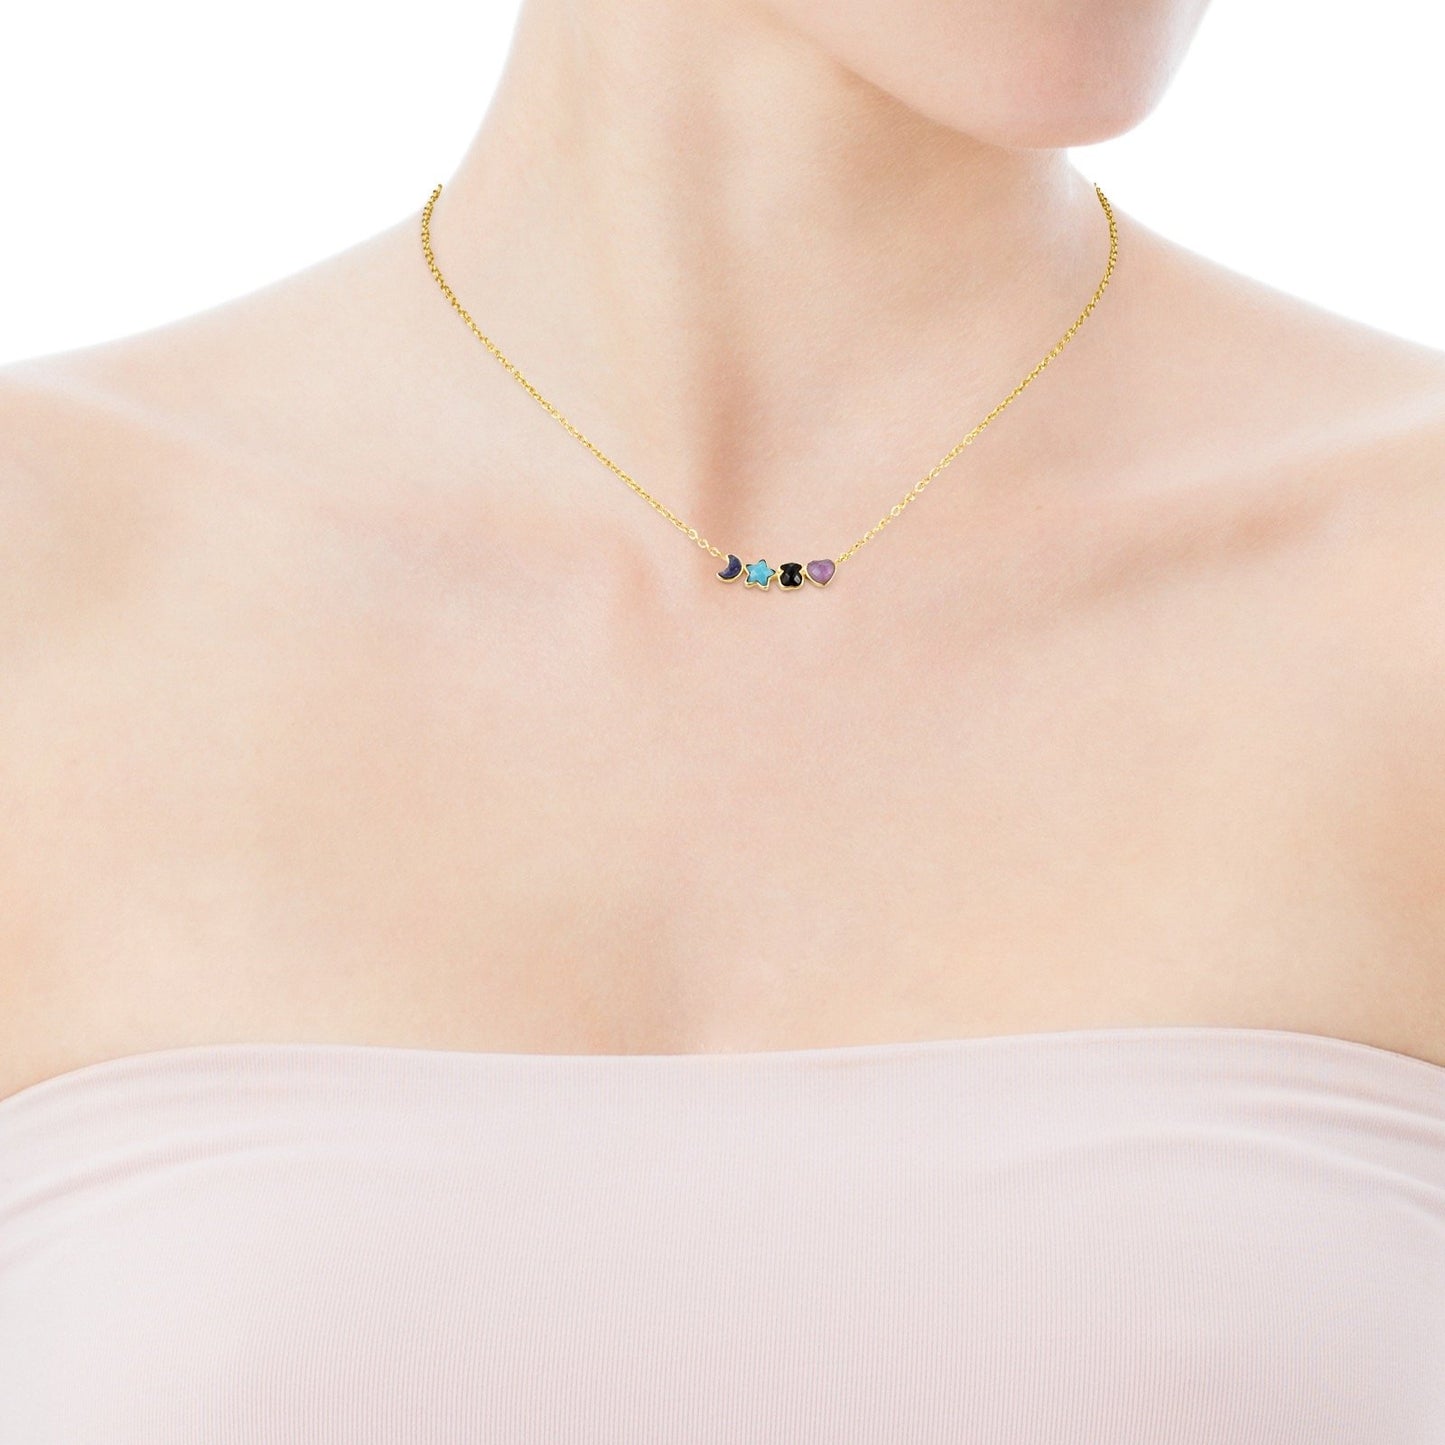 Tous Glory Necklace in Gold Vermeil with Gemstones 918592510